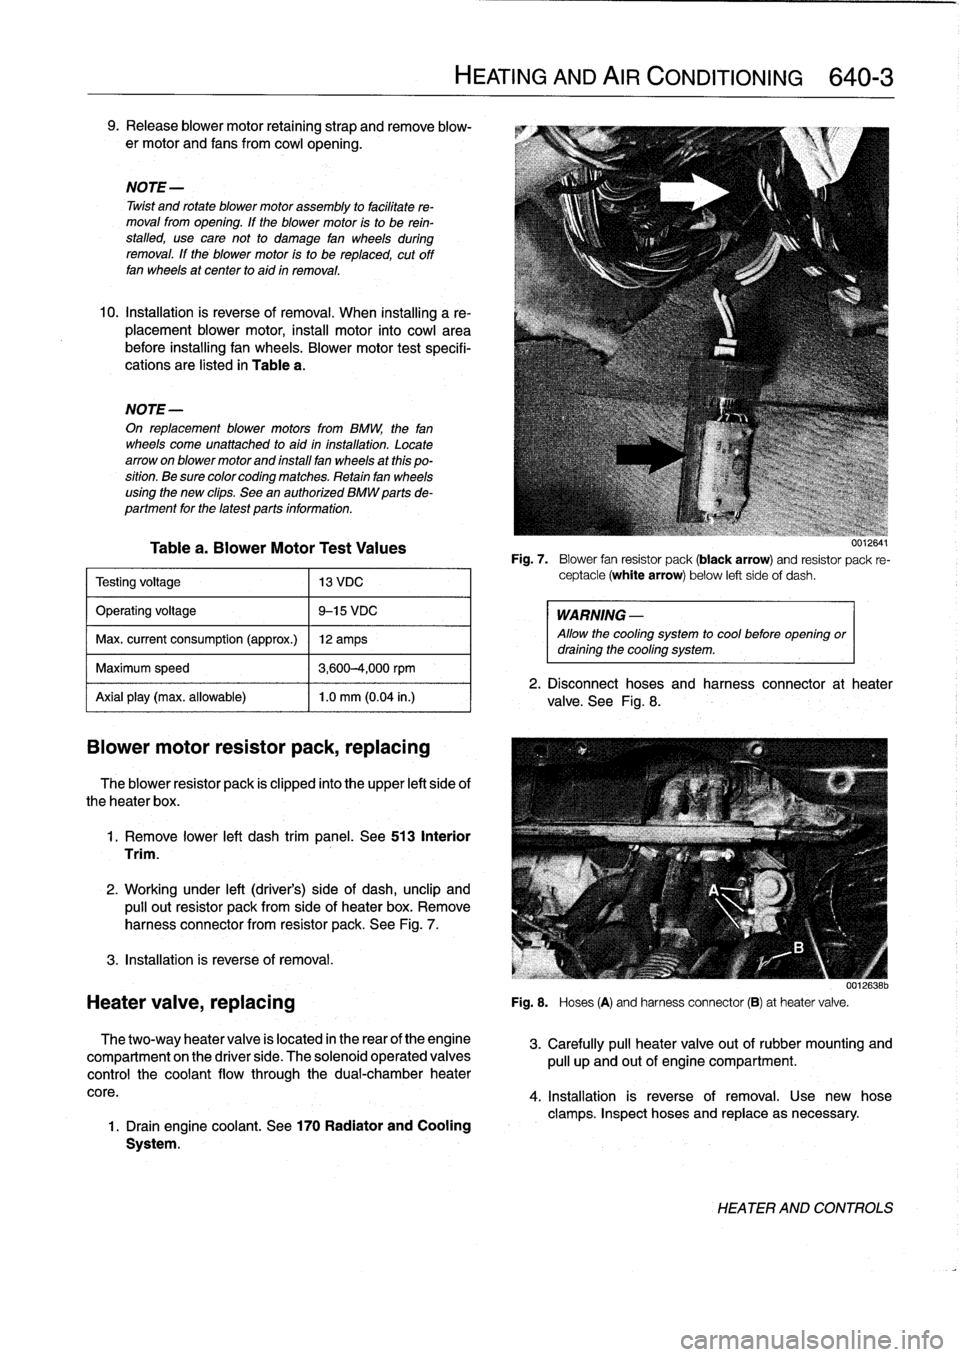 BMW 318i 1997 E36 Service Manual 
9
.
Release
blower
motor
retaining
strap
andremove
blow-
er
motor
and
fans
fromcowl
opening
.

NOTE-

Twist
and
rotate
blowermotor
assembly
to
facilítate
re-
moval
from
opening
.
If
the
blower
motor